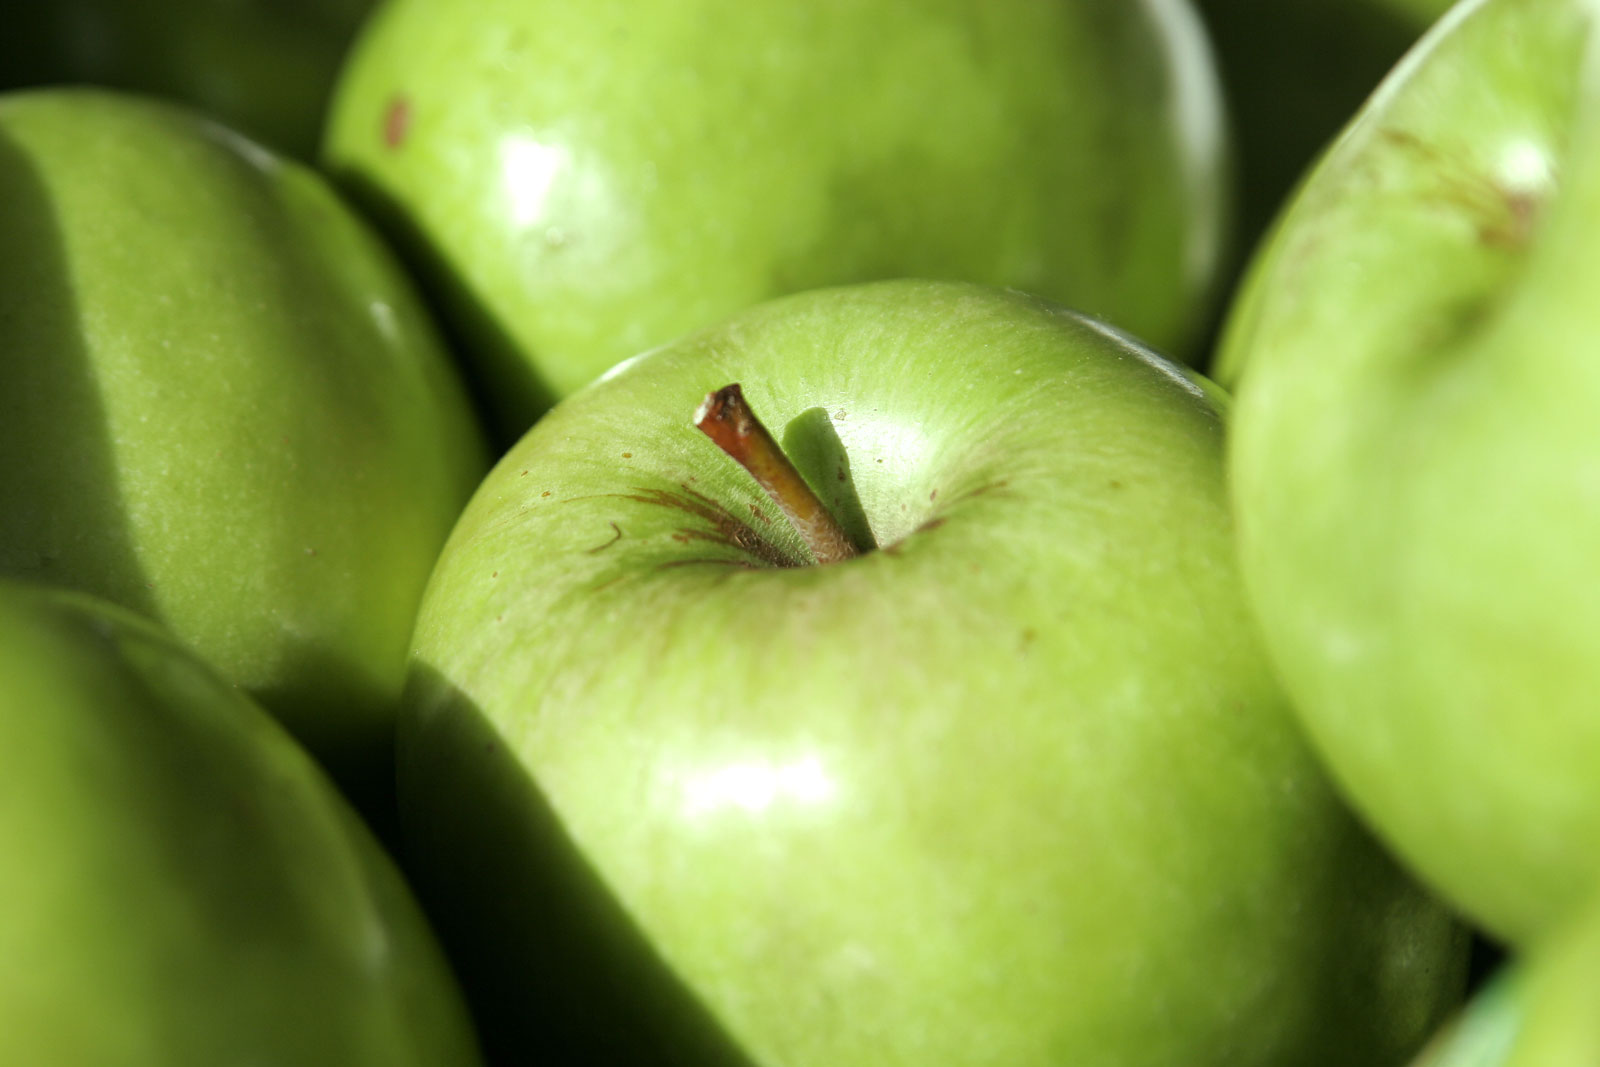 Apples (Granny Smith variety pictured) are amo...